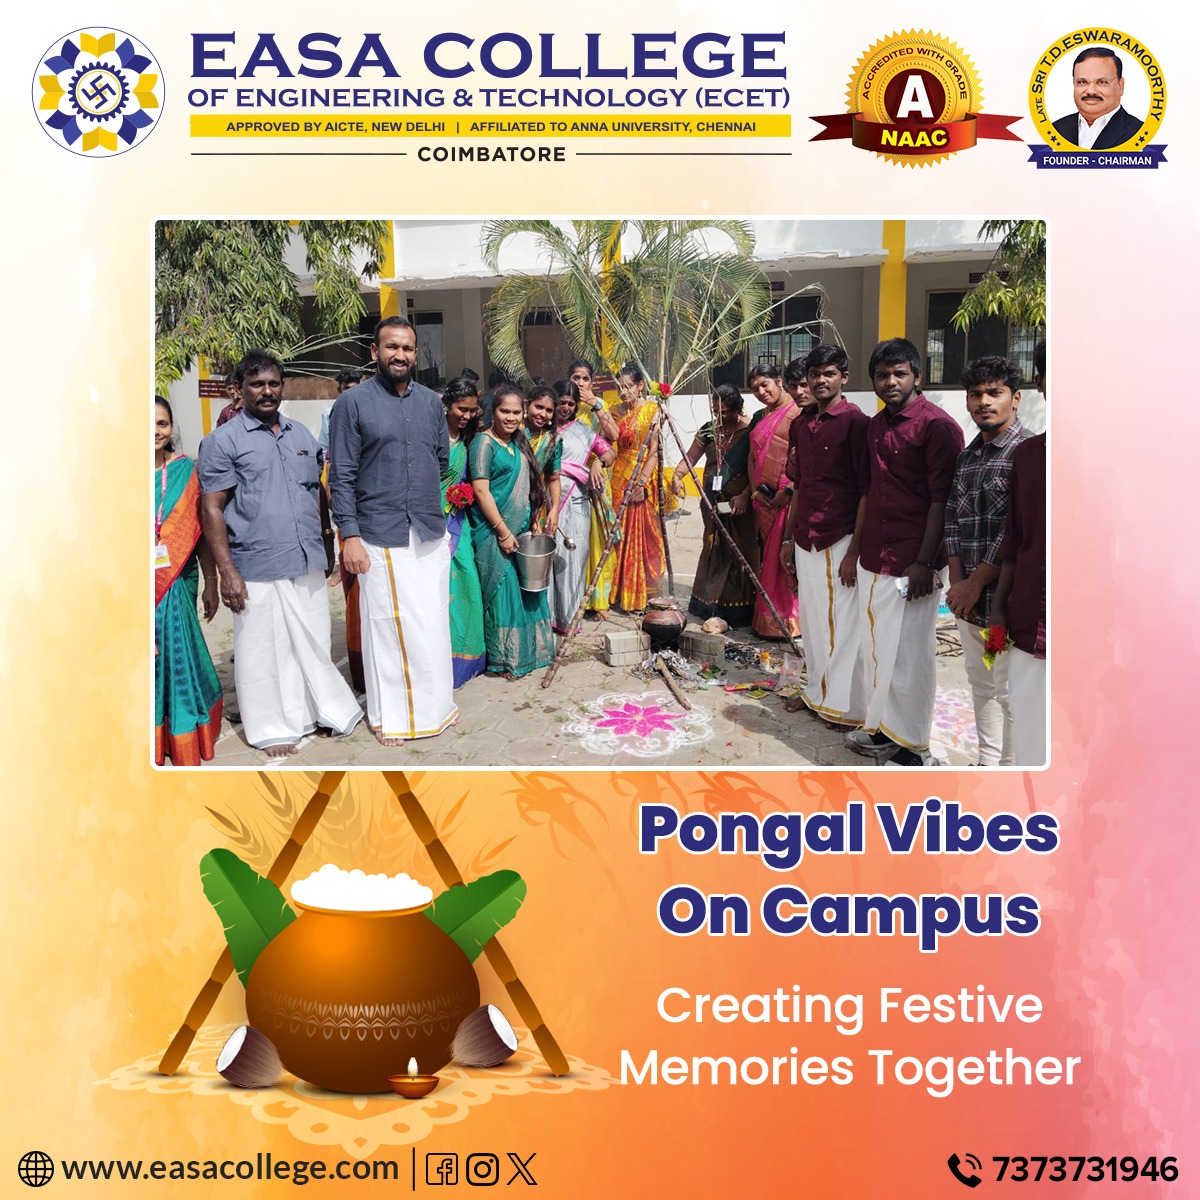 Vibrant Pongal Vibes on Campus